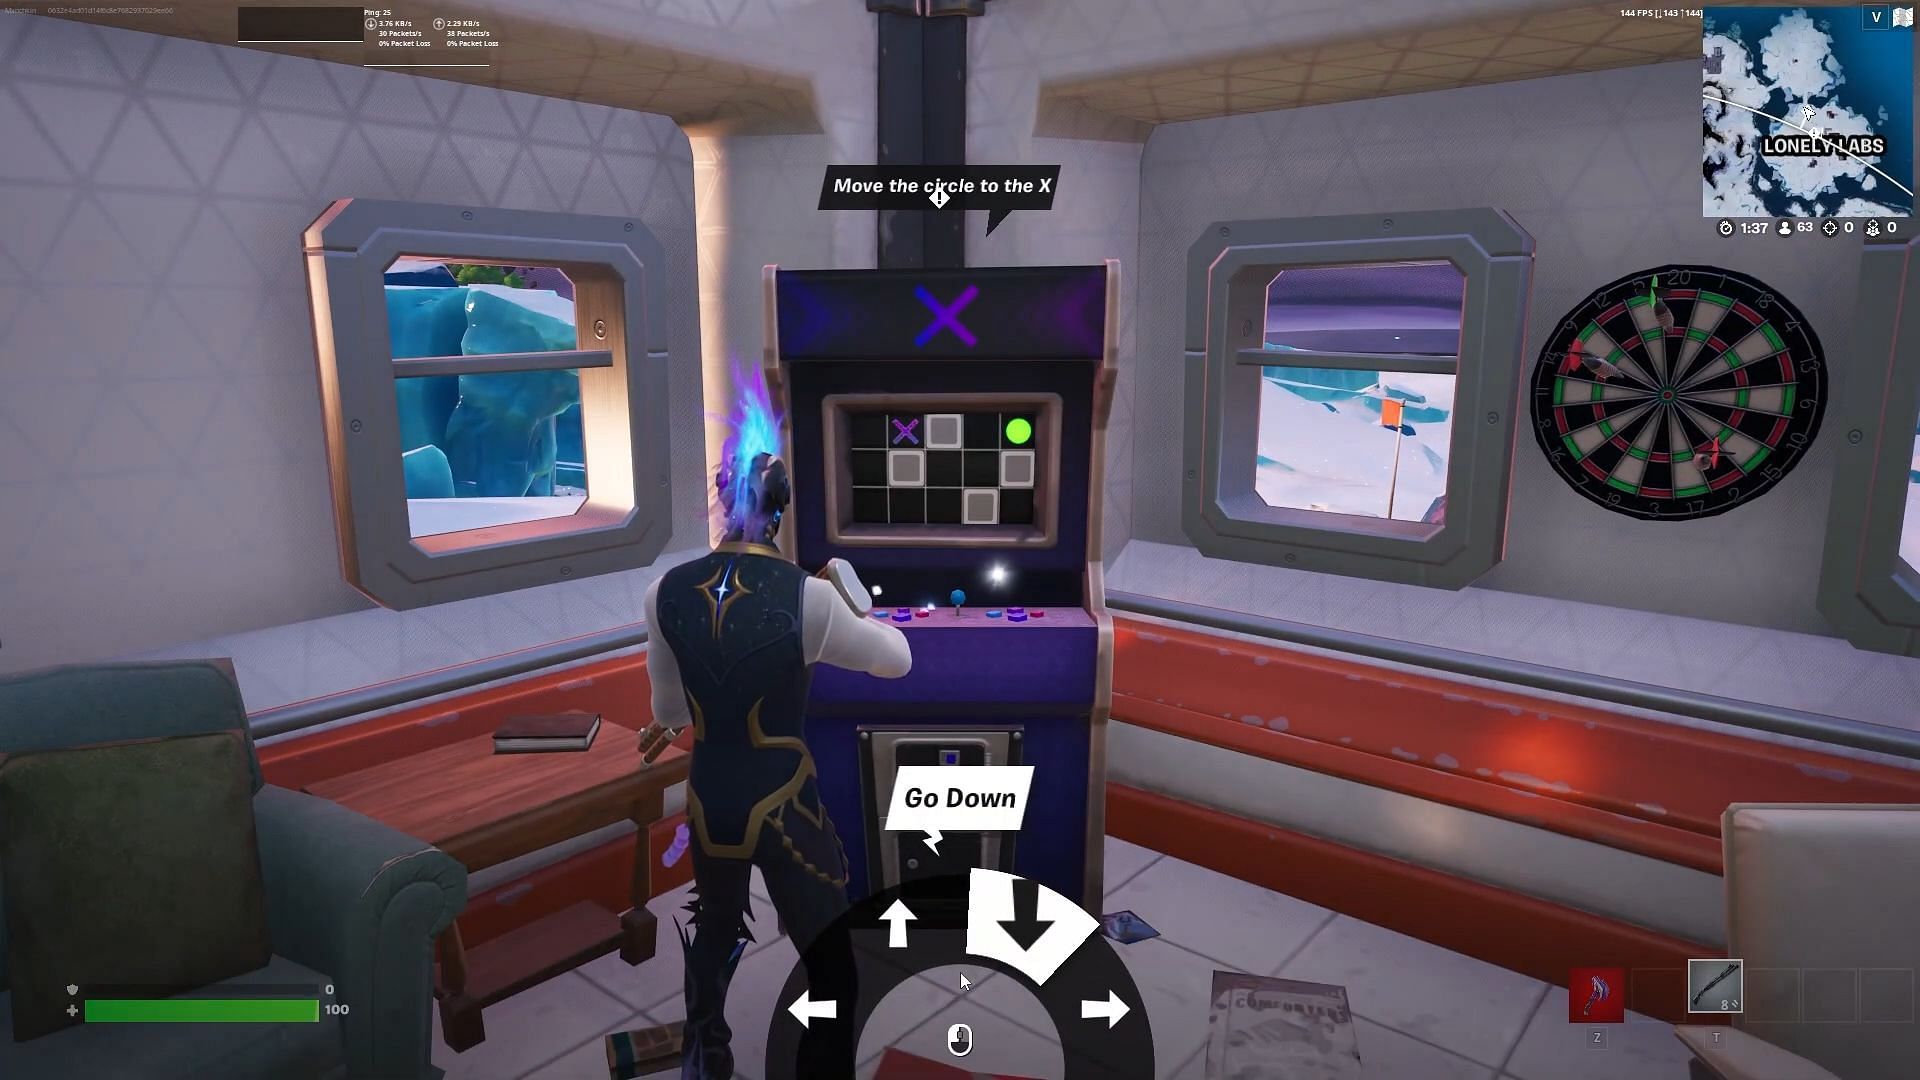 You will have to win another arcade game for the questline (Image via Epic Games)